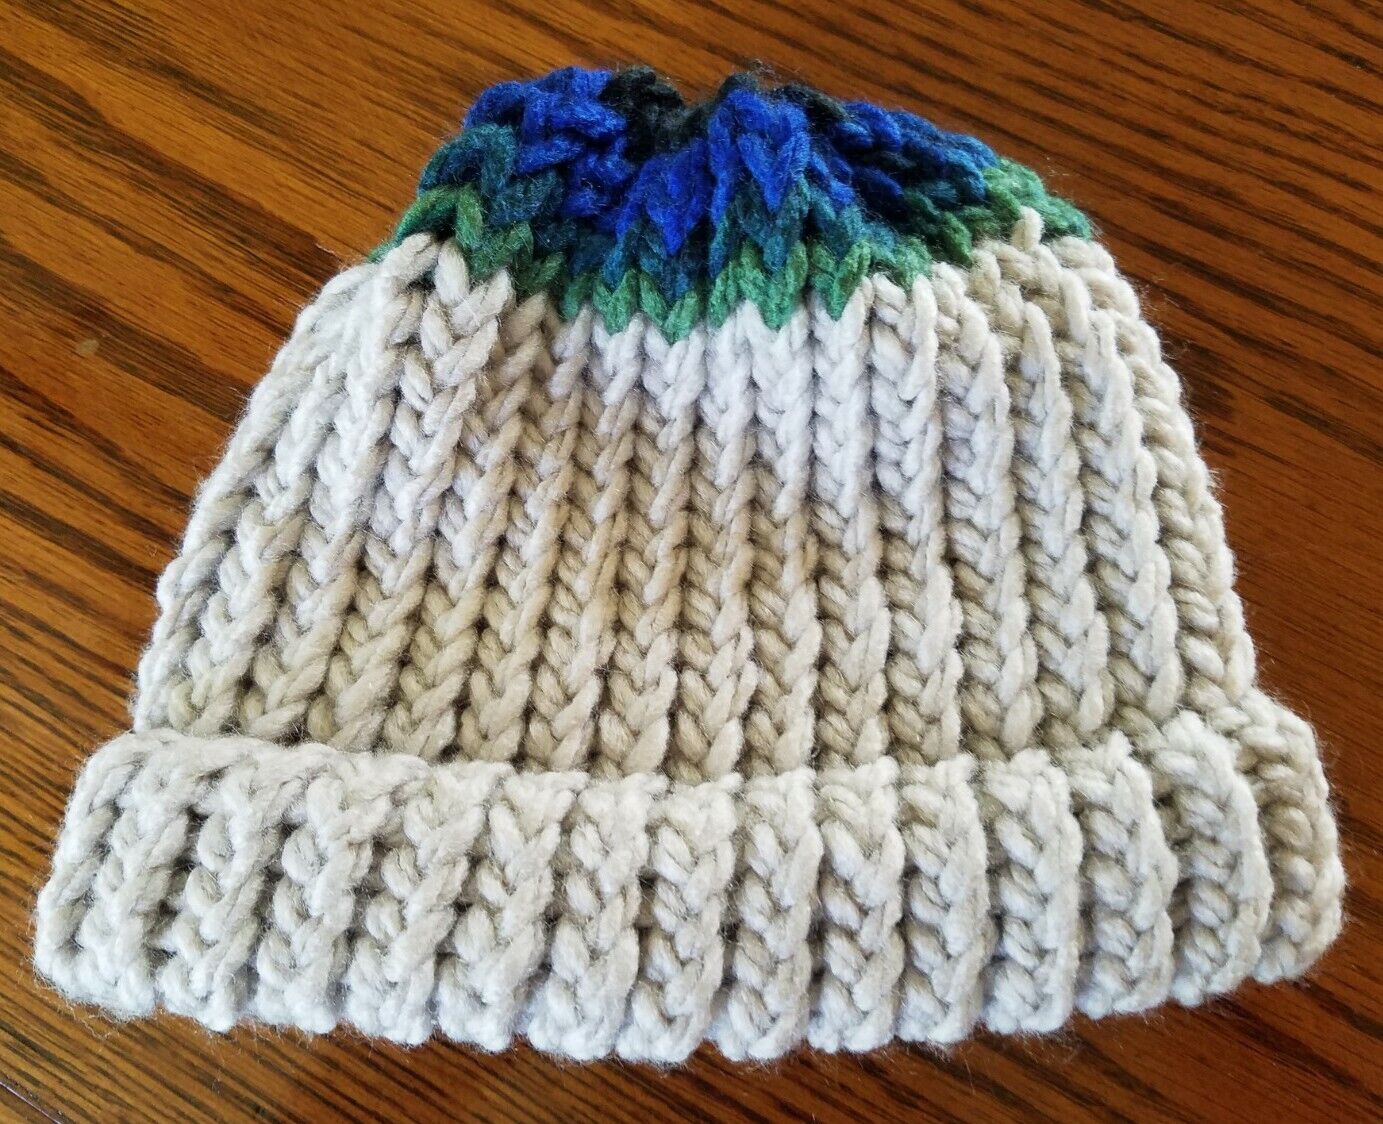 Hand Knit Infant Hat In Tan, Green & Blue.  Super Soft, Very Warm